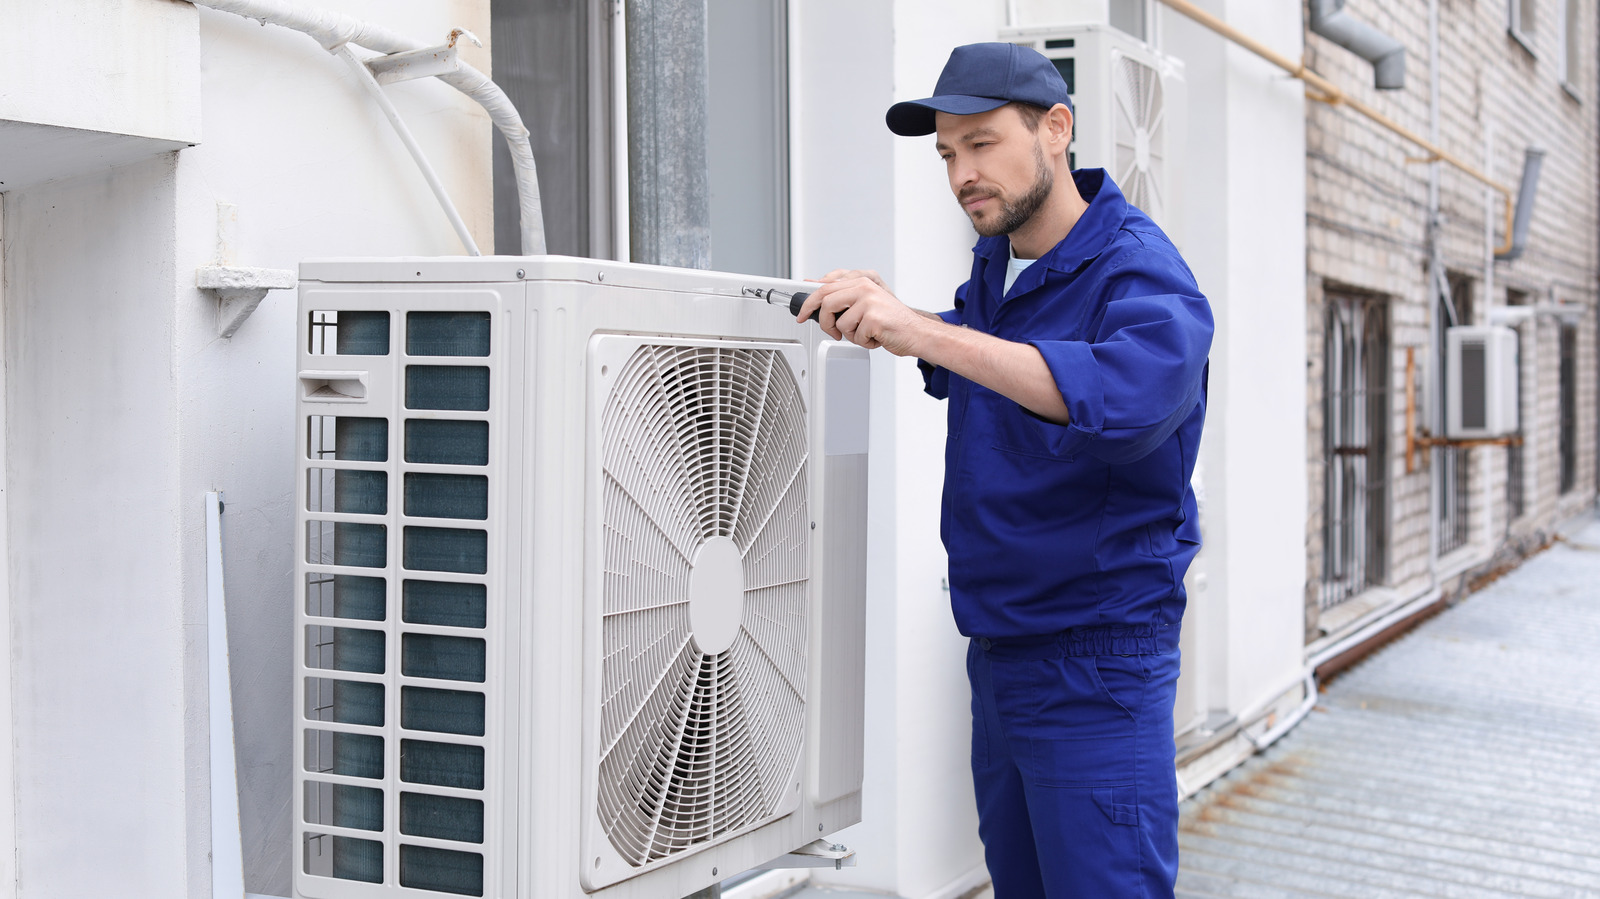 https://www.housedigest.com/img/gallery/how-much-does-it-cost-to-replace-an-air-conditioning-unit/l-intro-1651850327.jpg